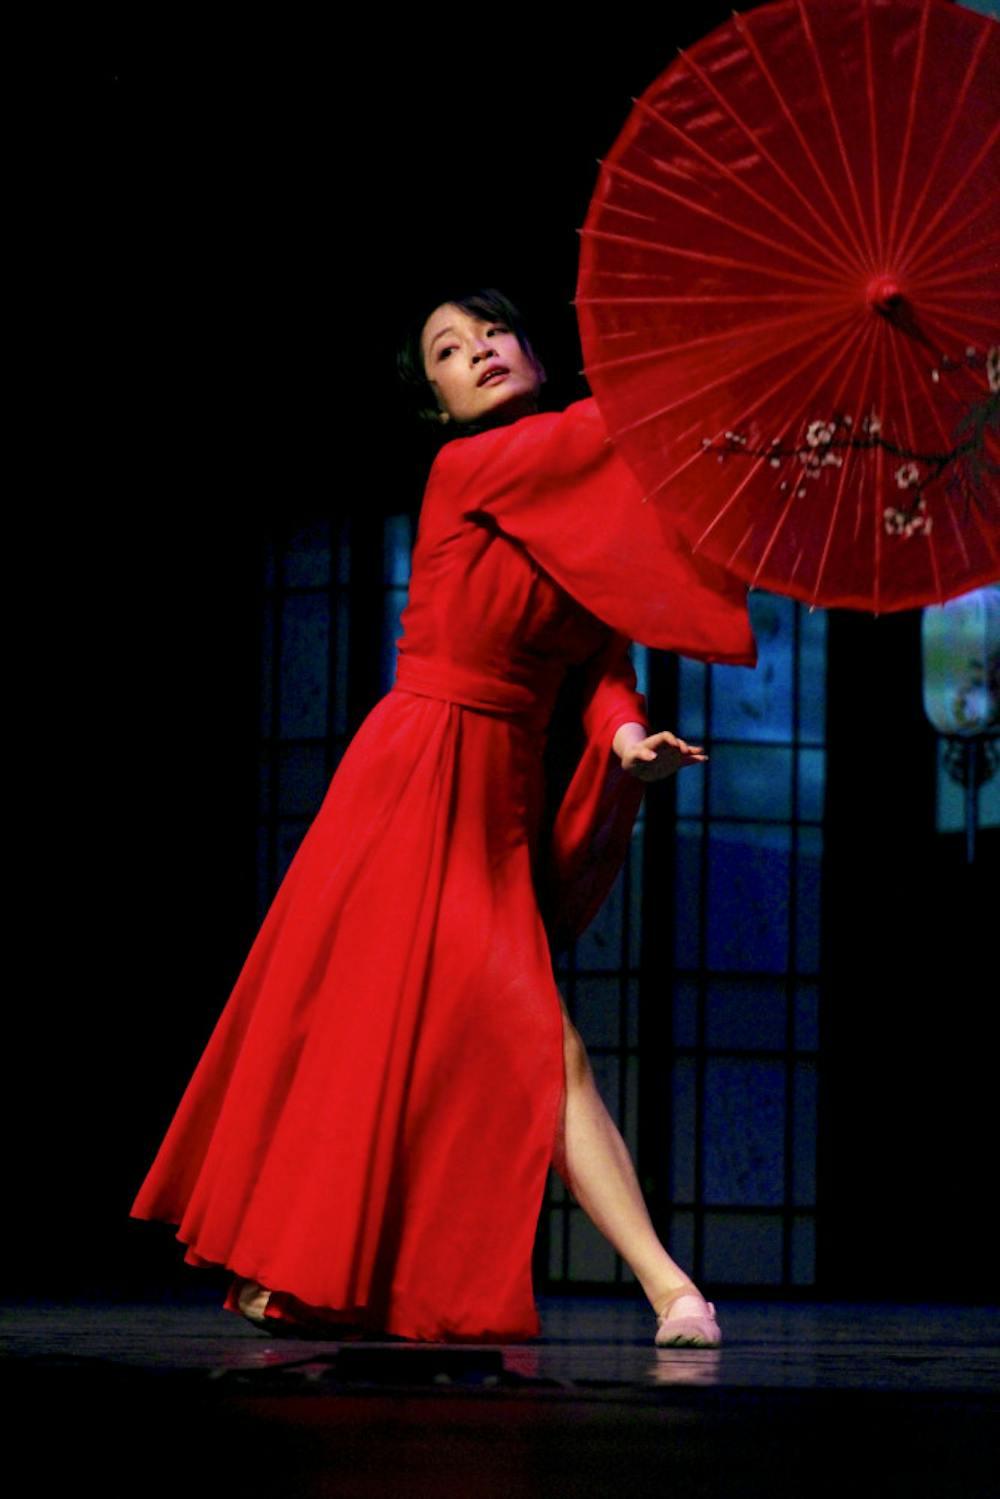 <p dir="ltr"><span>A dancer within the UF Chinese Student Association Dance Club performs in a piece titled "Zhi Zi Yugui + Cry Cry" while adorning traditional Chinese garments in honor of the new year inside the Phillips Center for Performing Arts on Sunday night.</span></p><p><span> </span></p>